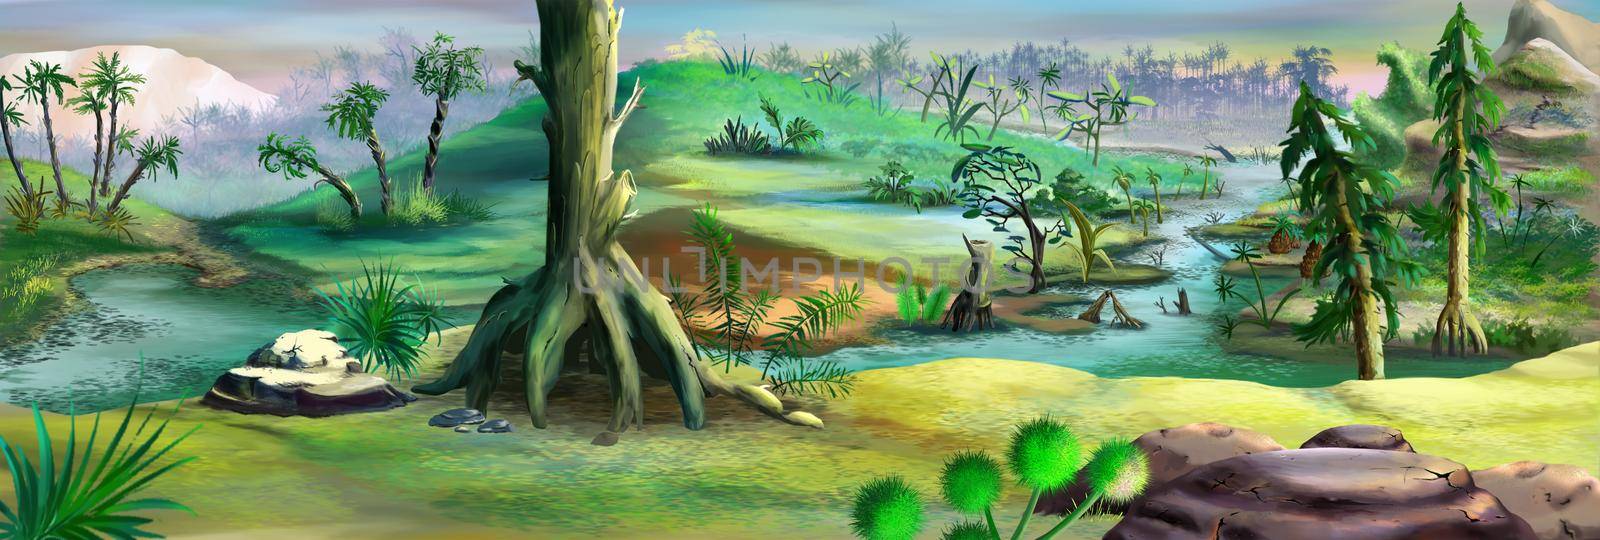 Primeval forest in the Mesozoic era. Digital Painting Background, Illustration.